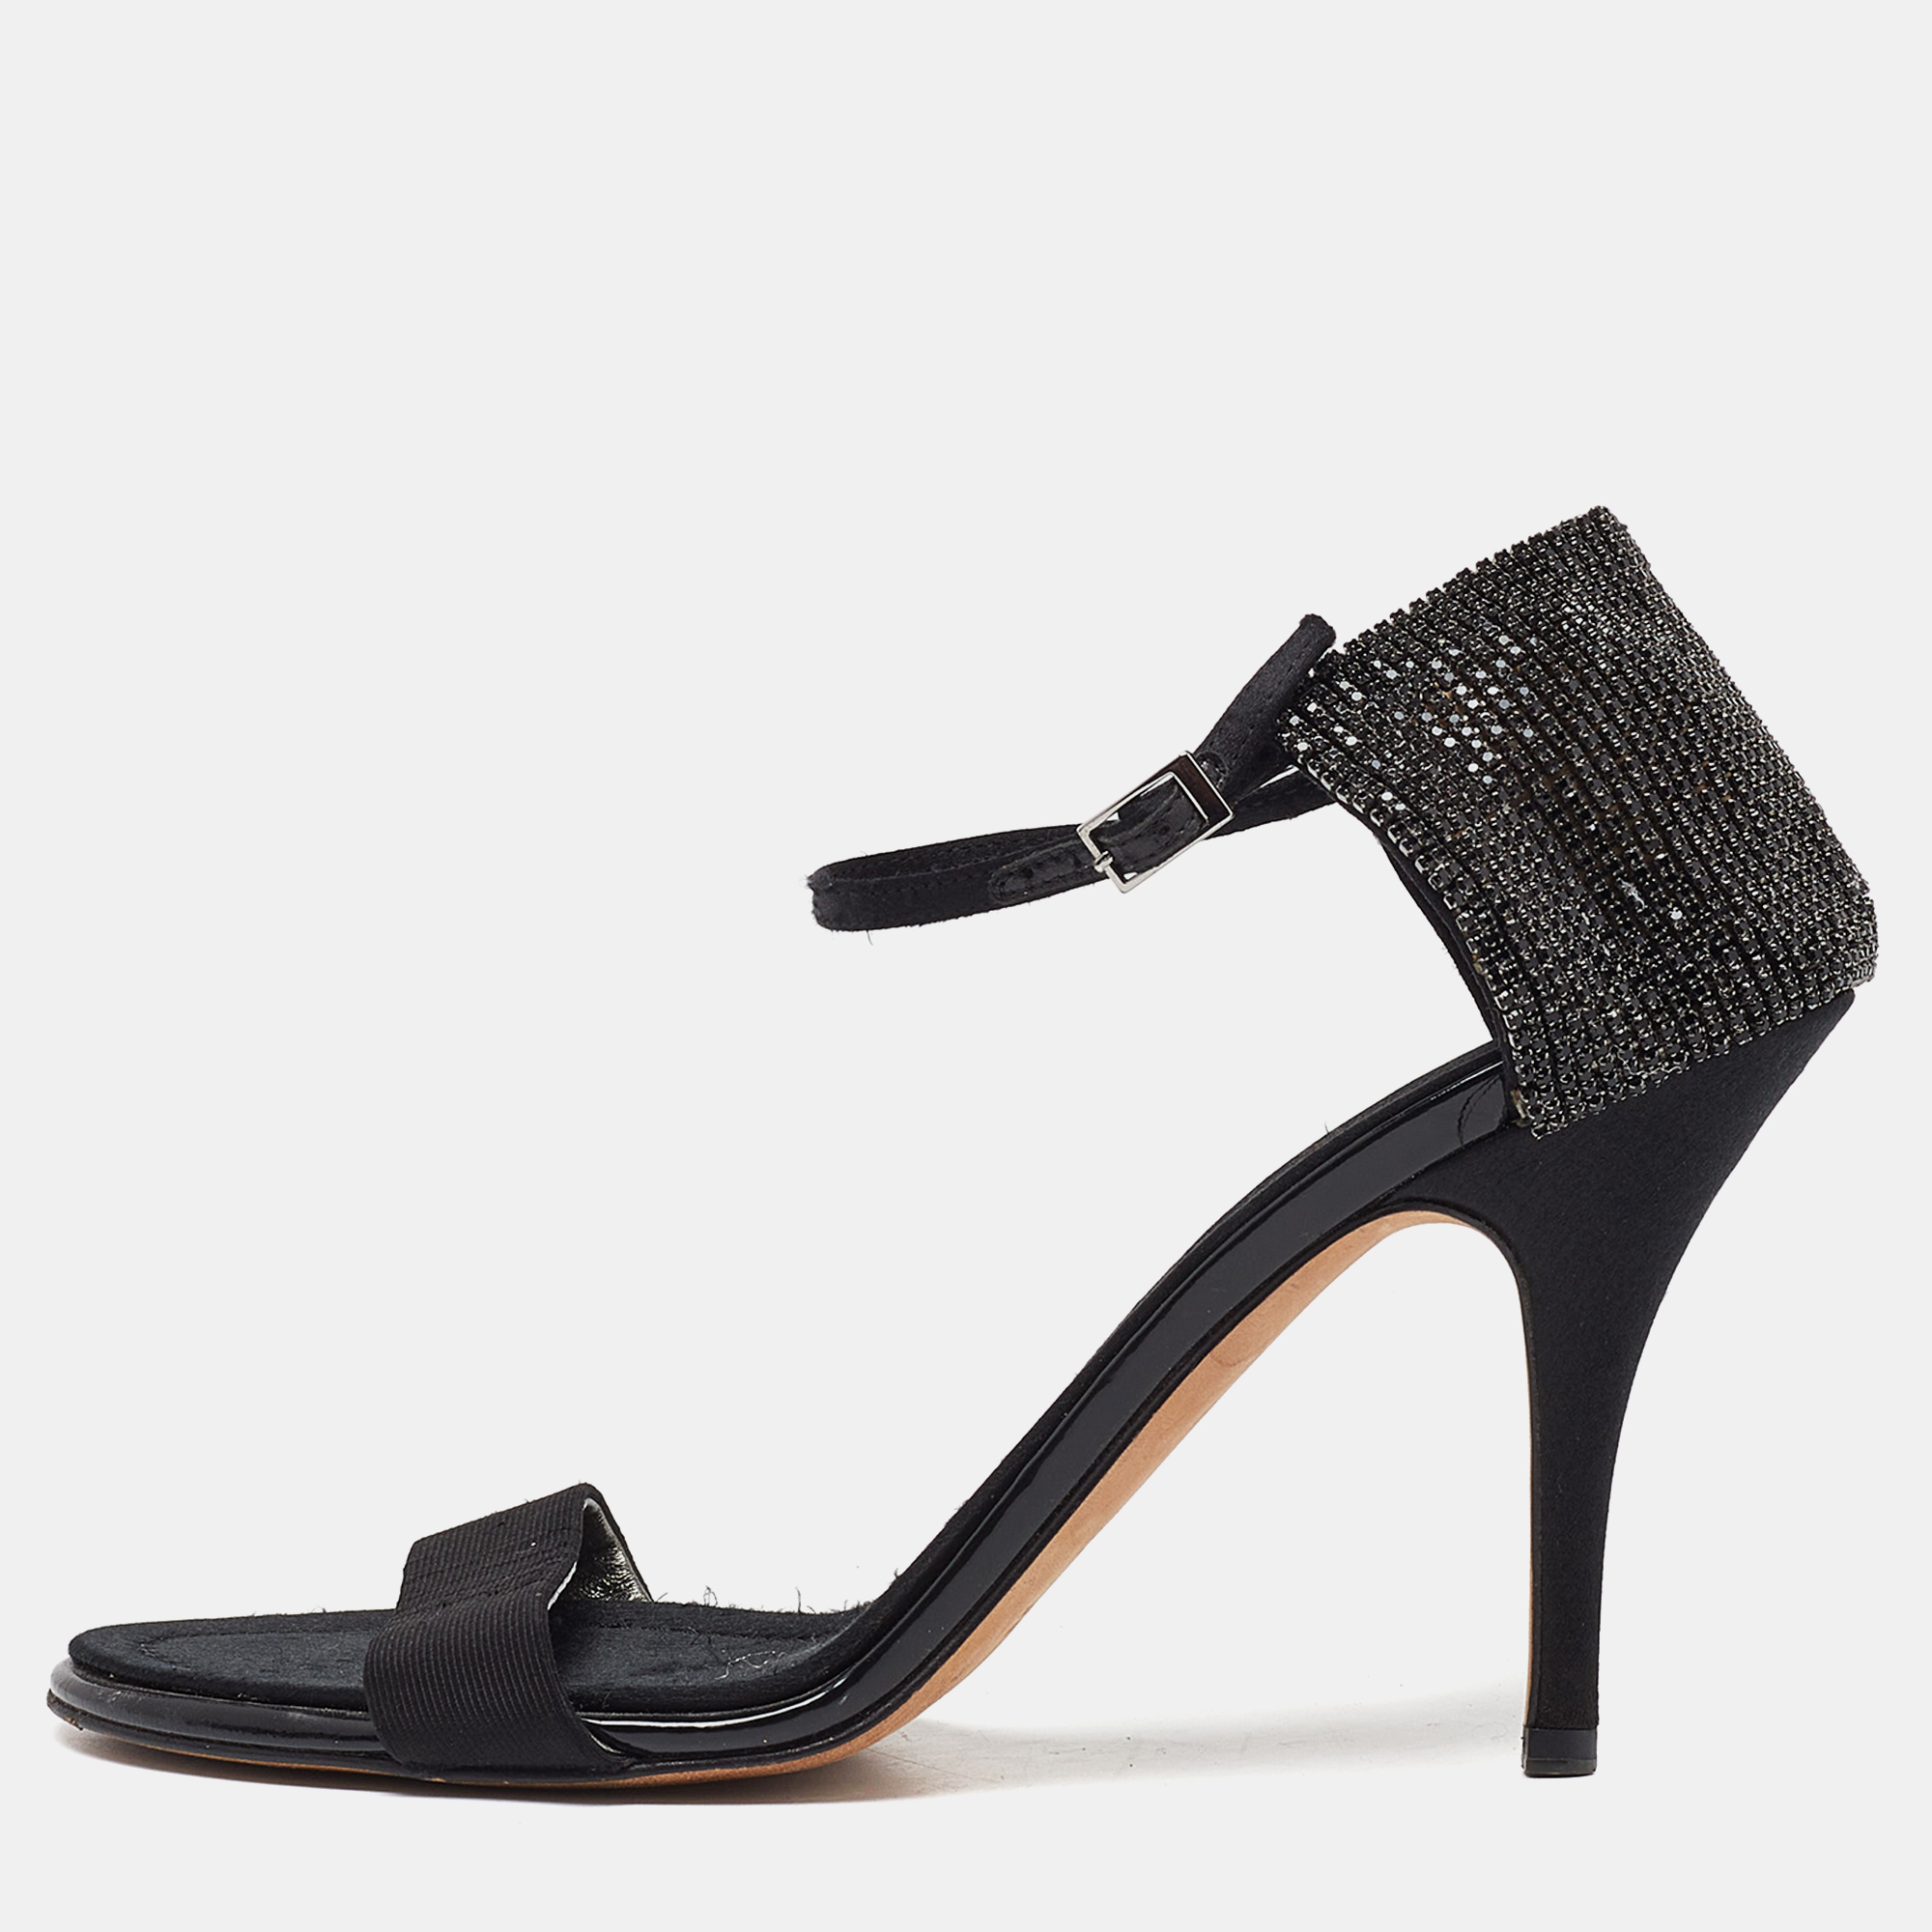 Pre-owned Giuseppe Zanotti Black Fabric And Crystal Embellished Ankle Strap Sandals Size 39.5